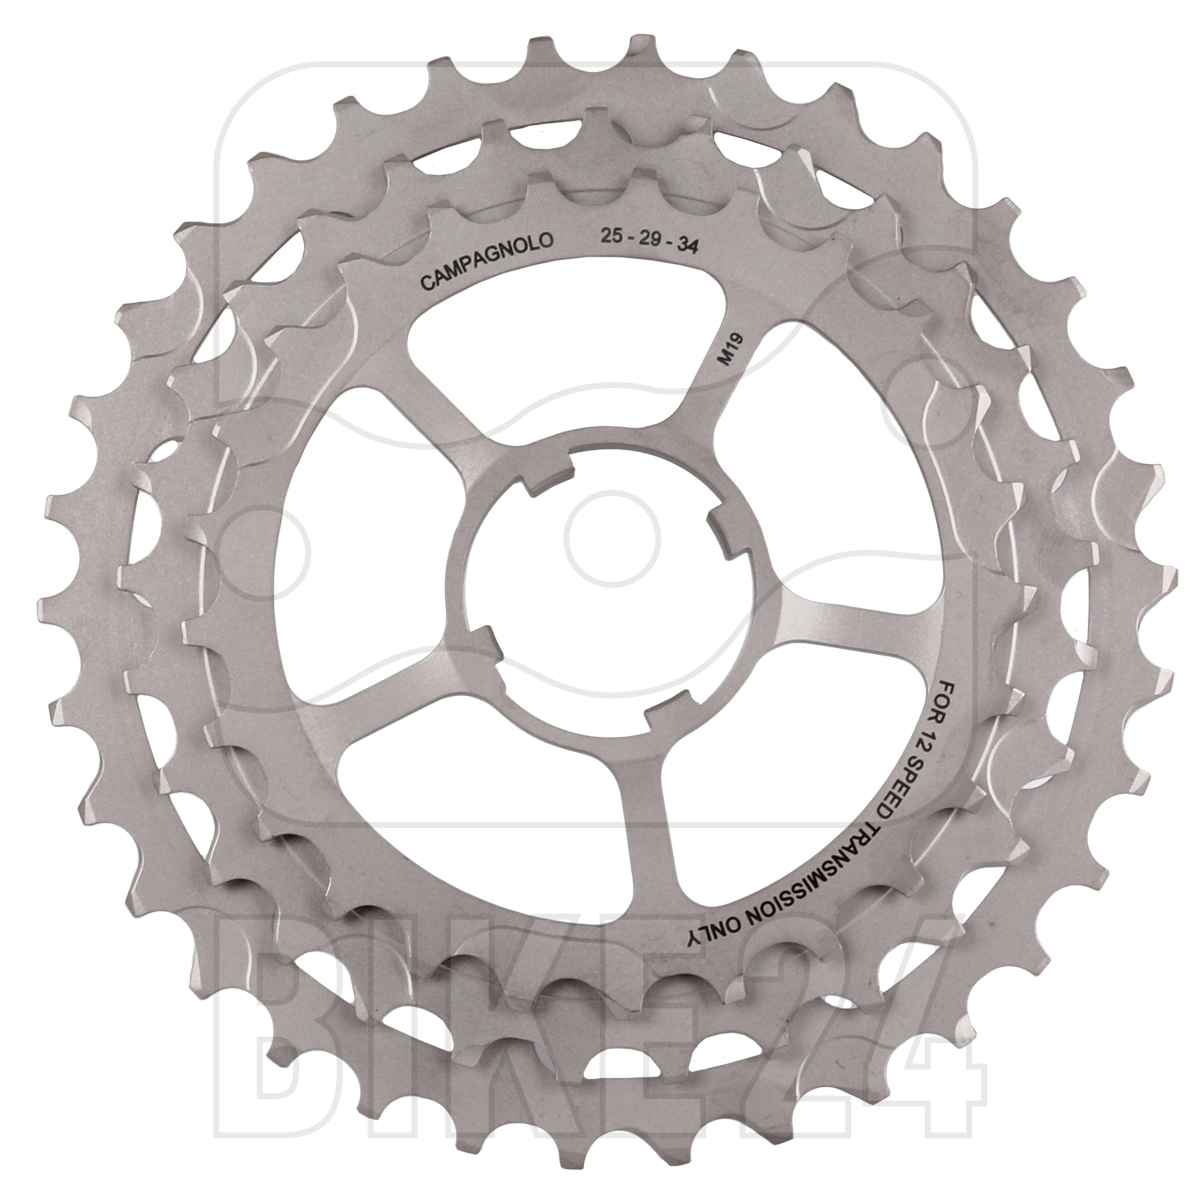 Moeras opening Verdampen Campagnolo Sprockets for Super Record 12-speed Cassette - 25-29-34 Teeth -  silver